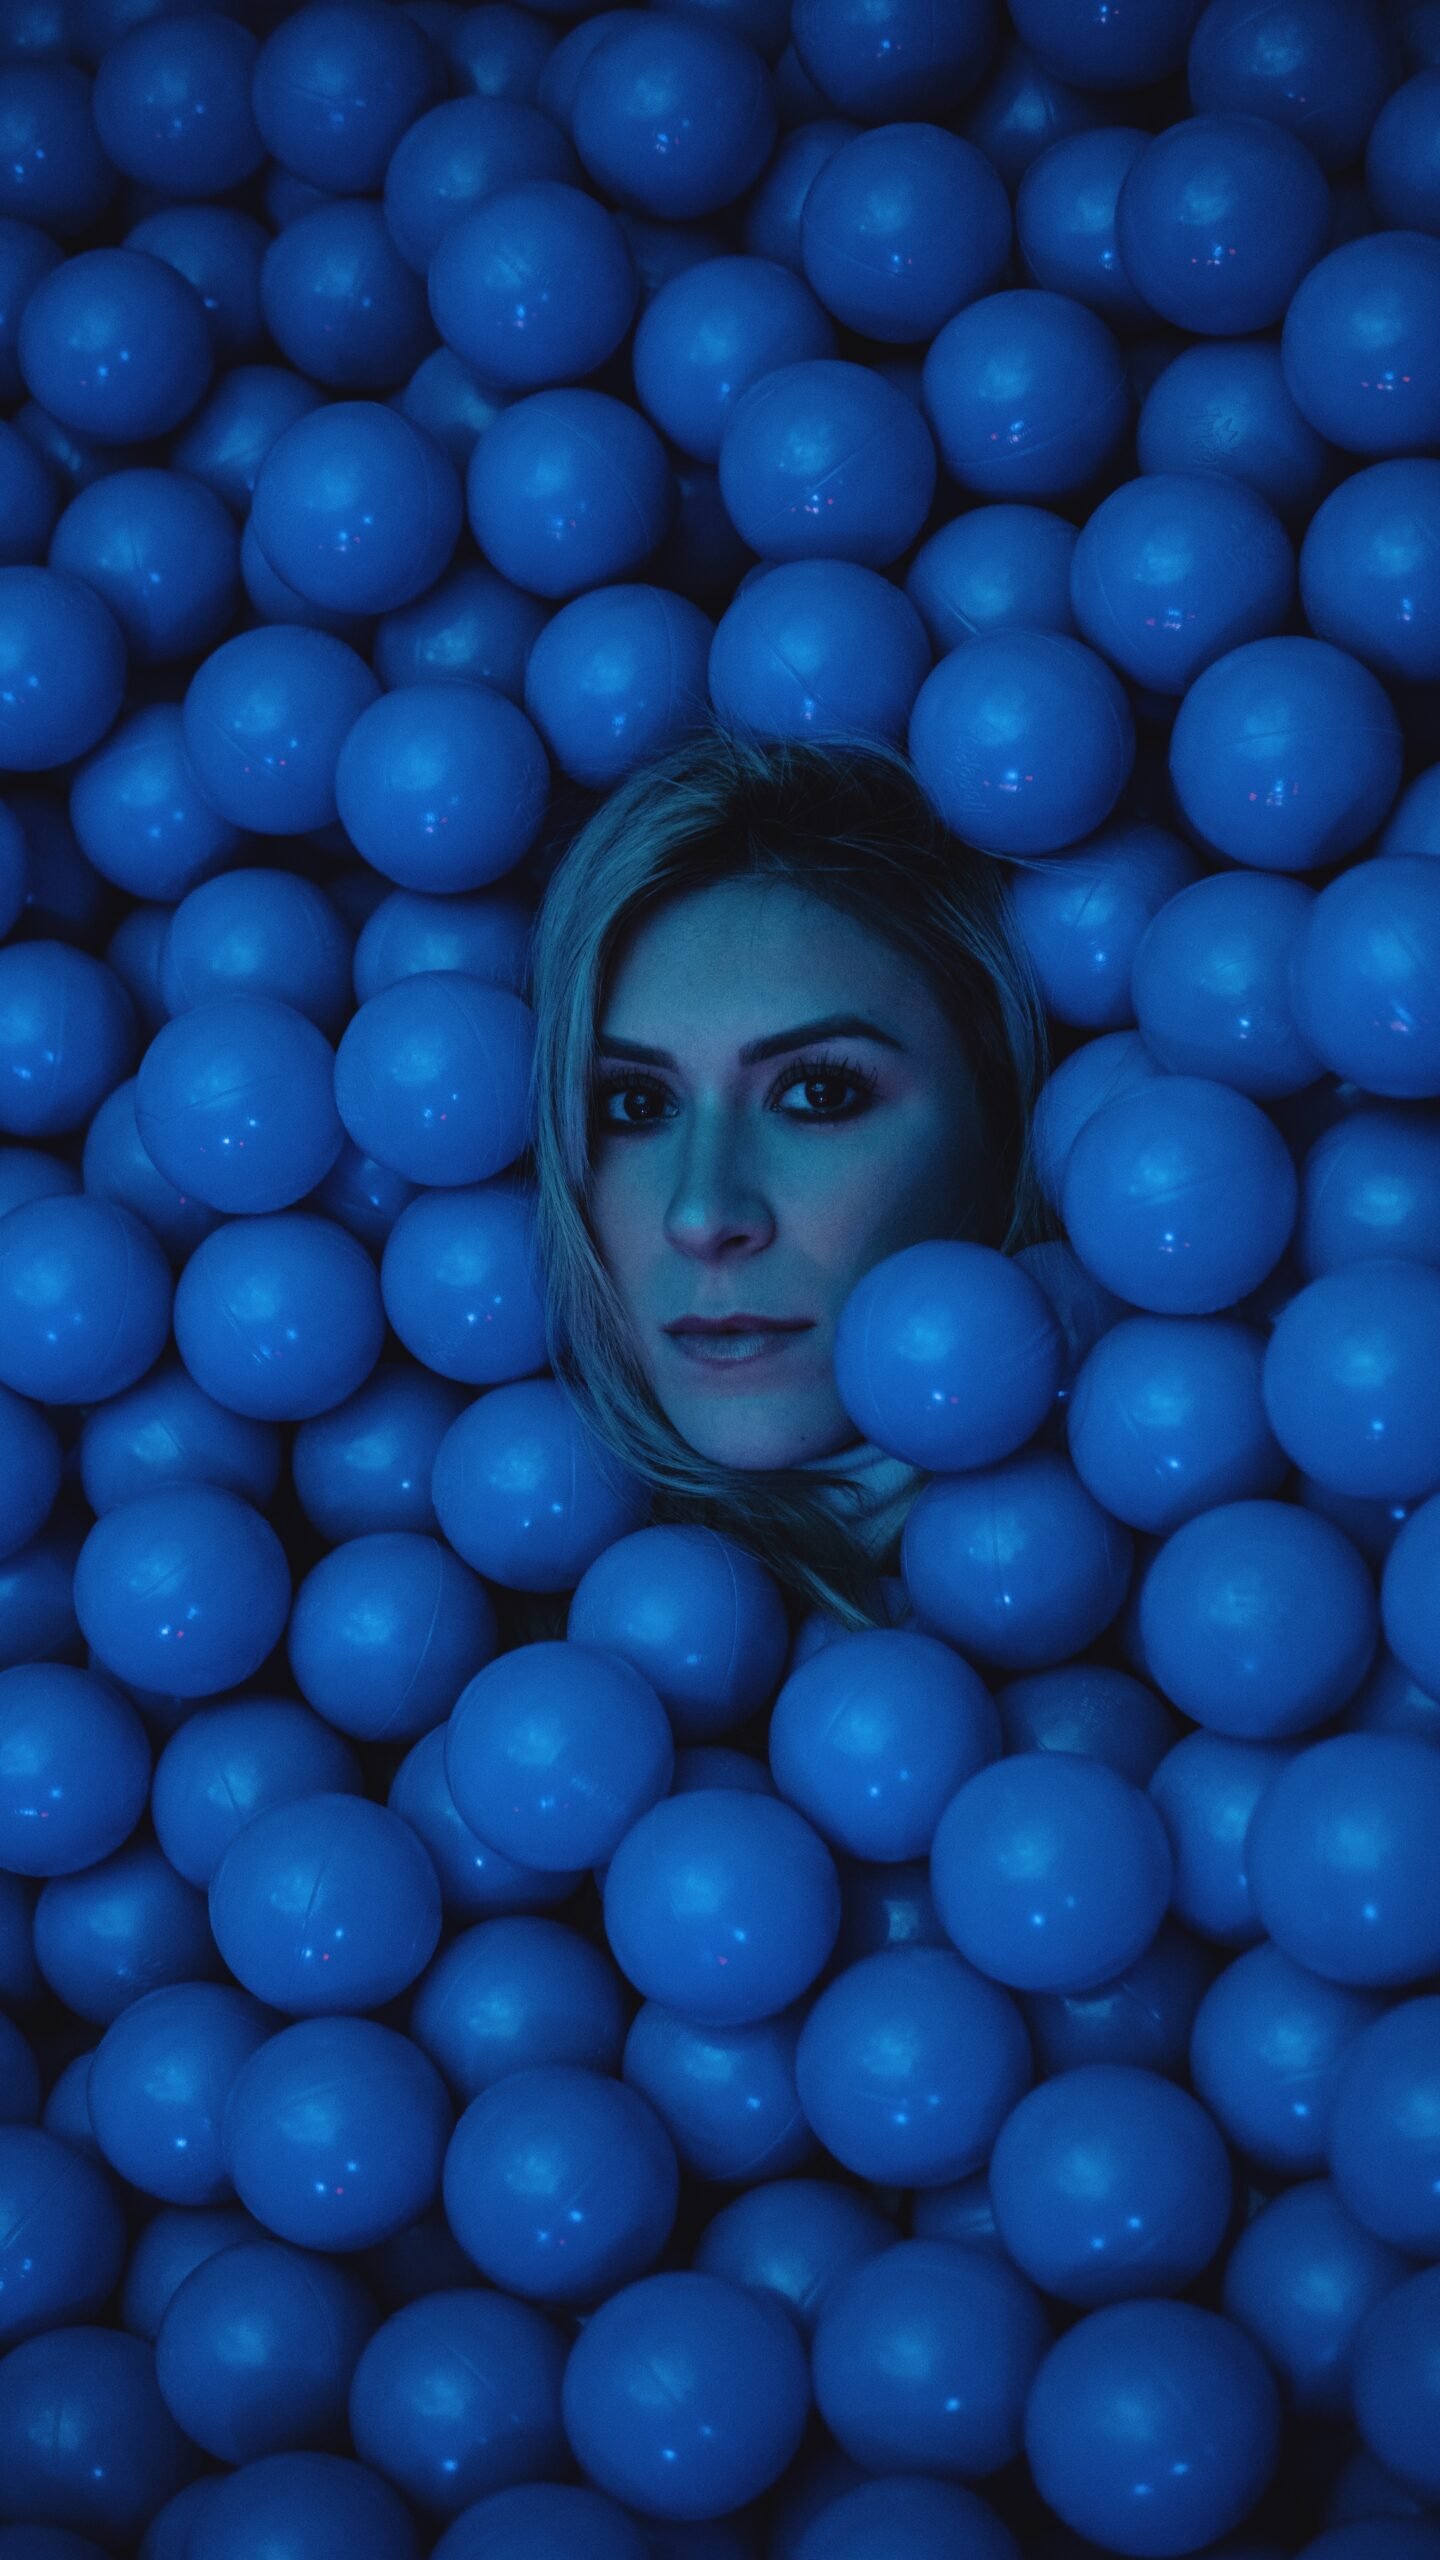 woman's face surrounded by blue balls